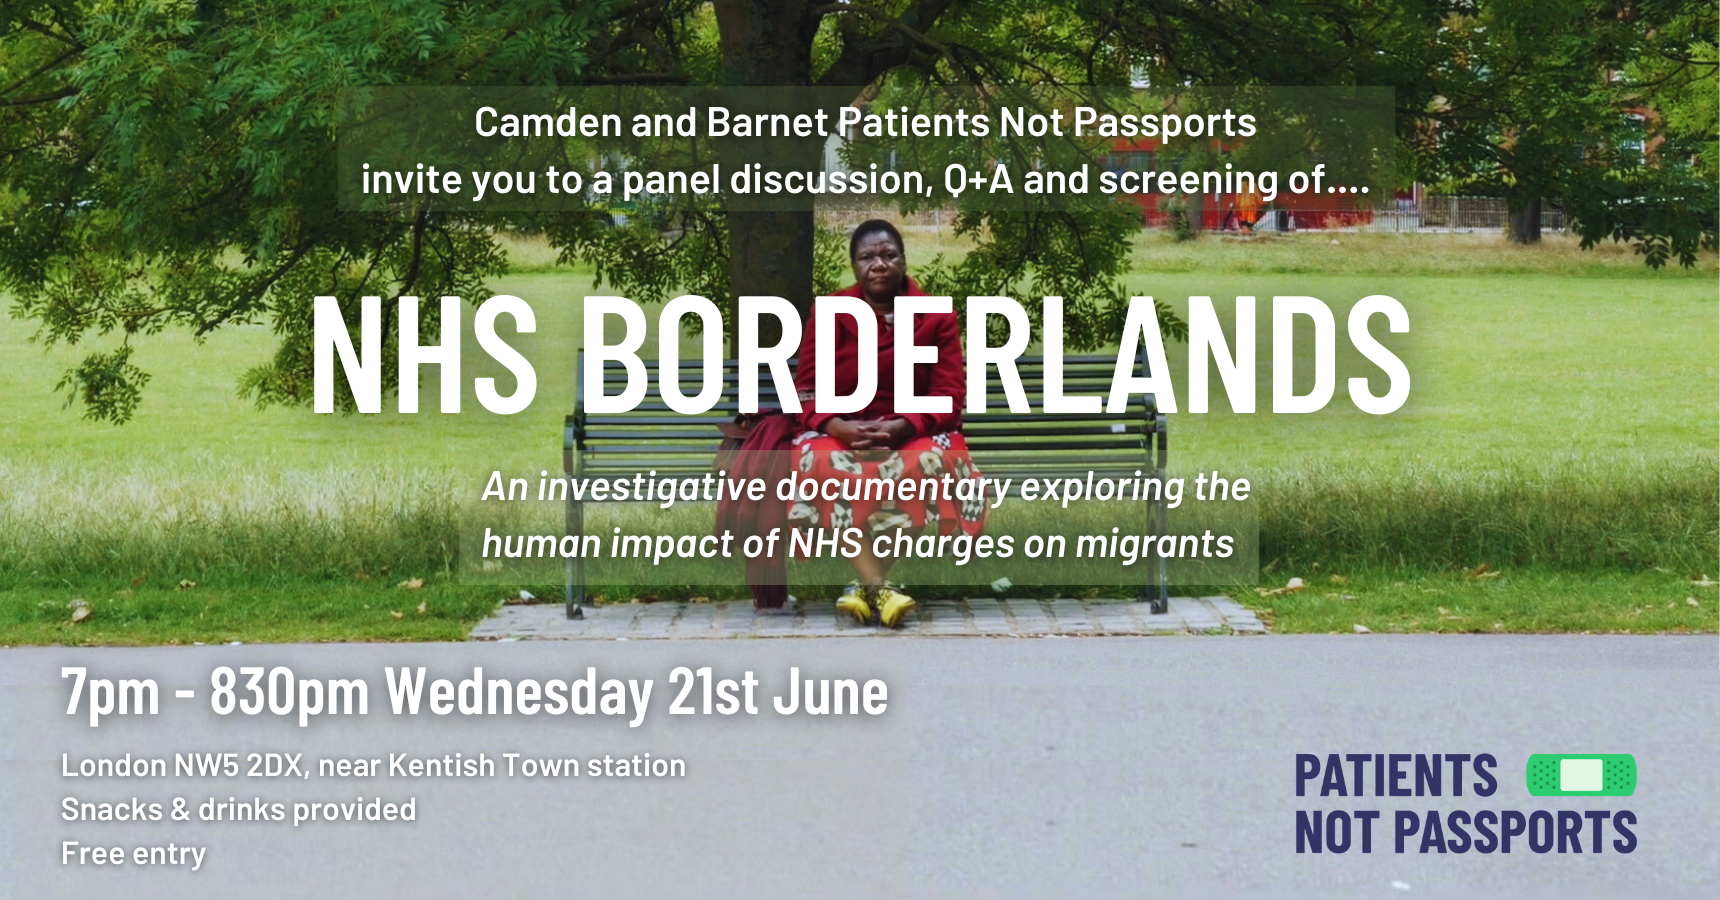 Poster with a wide image of a black woman wearing a red coat and floral red dress. She is sat on a bench in a park and looking at the camera. The overlaying text reads: Camden and Barnet Patients Not Passports invite you to a panel discussion, Q+A and screening of.... NHS Borderlands An investigative documentary exploring the human impact of NHS charges on migrants 7pm - 830pm Wednesday 21st June London NW5 2DX, near Kentish Town station Snacks & drinks provided Free entry Patients Not Passports